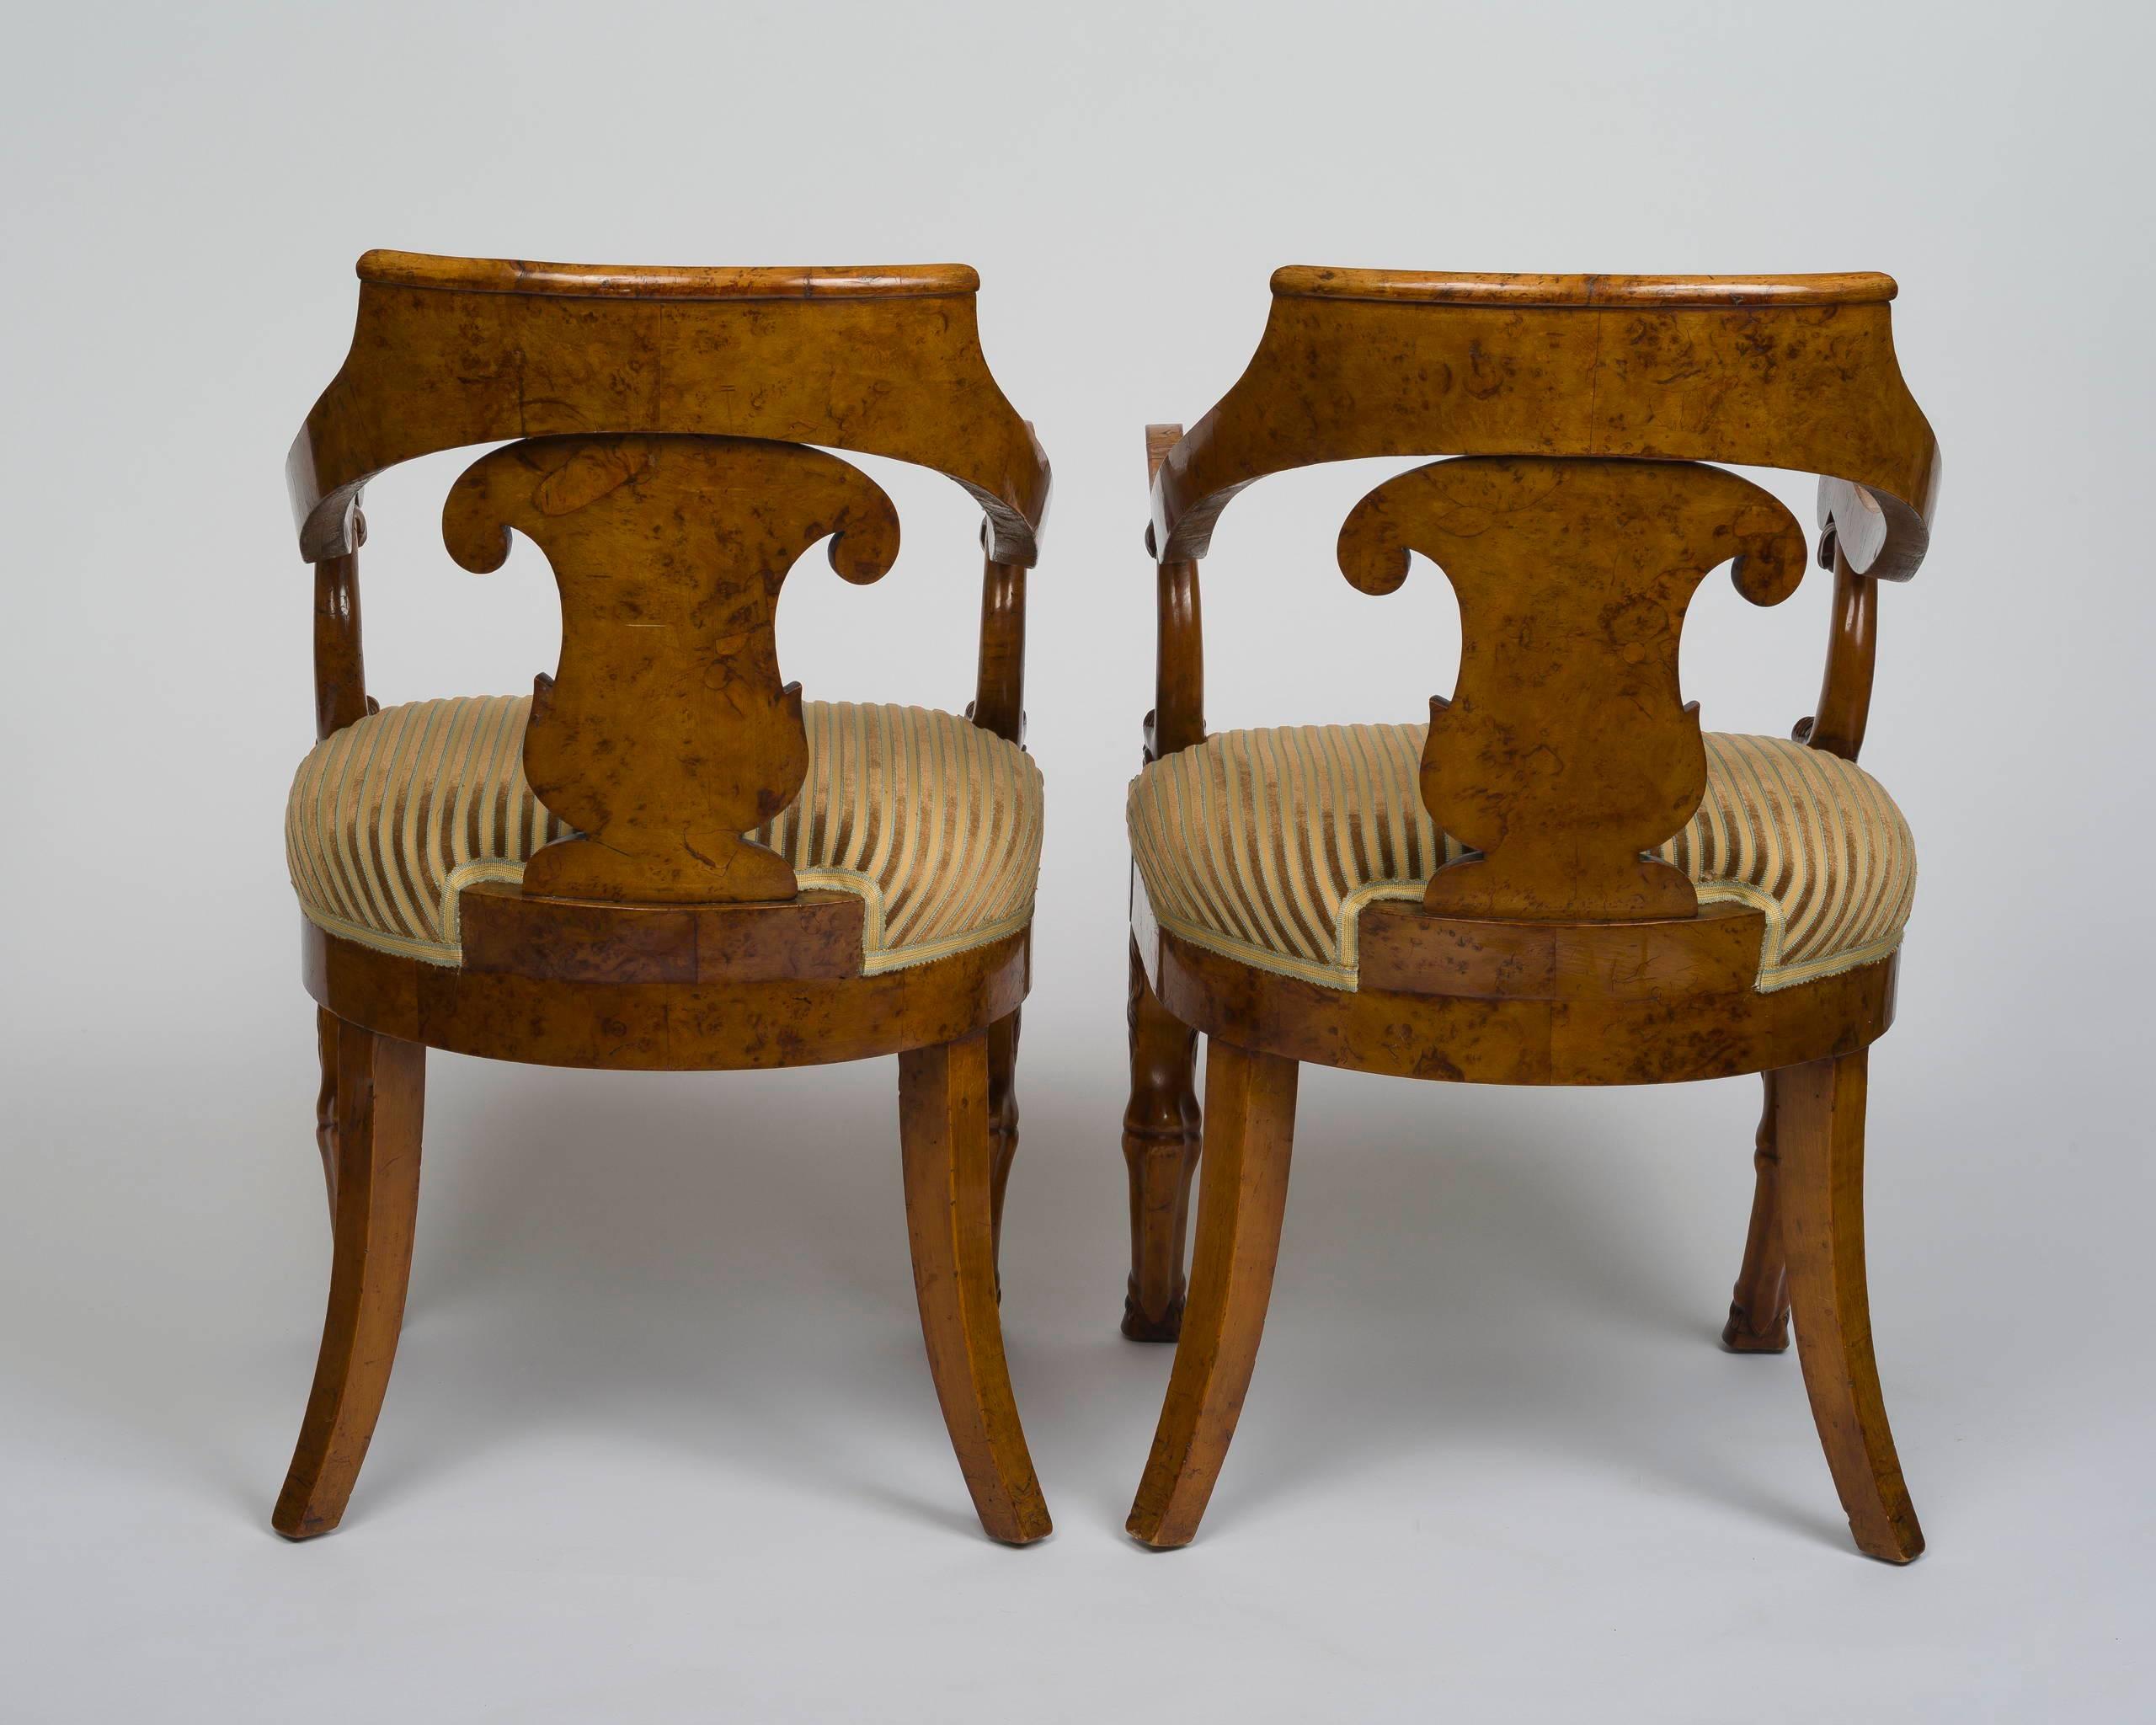 The curved pierced back with a palmette-inlaid shaped splat terminating in dolphin supports raised on an upholstered seat, on front carved joined hairy animal legs (pieds de bîches) and hoof feet and back sabre legs; stamped: JACOB FRERES RUE MESLEE